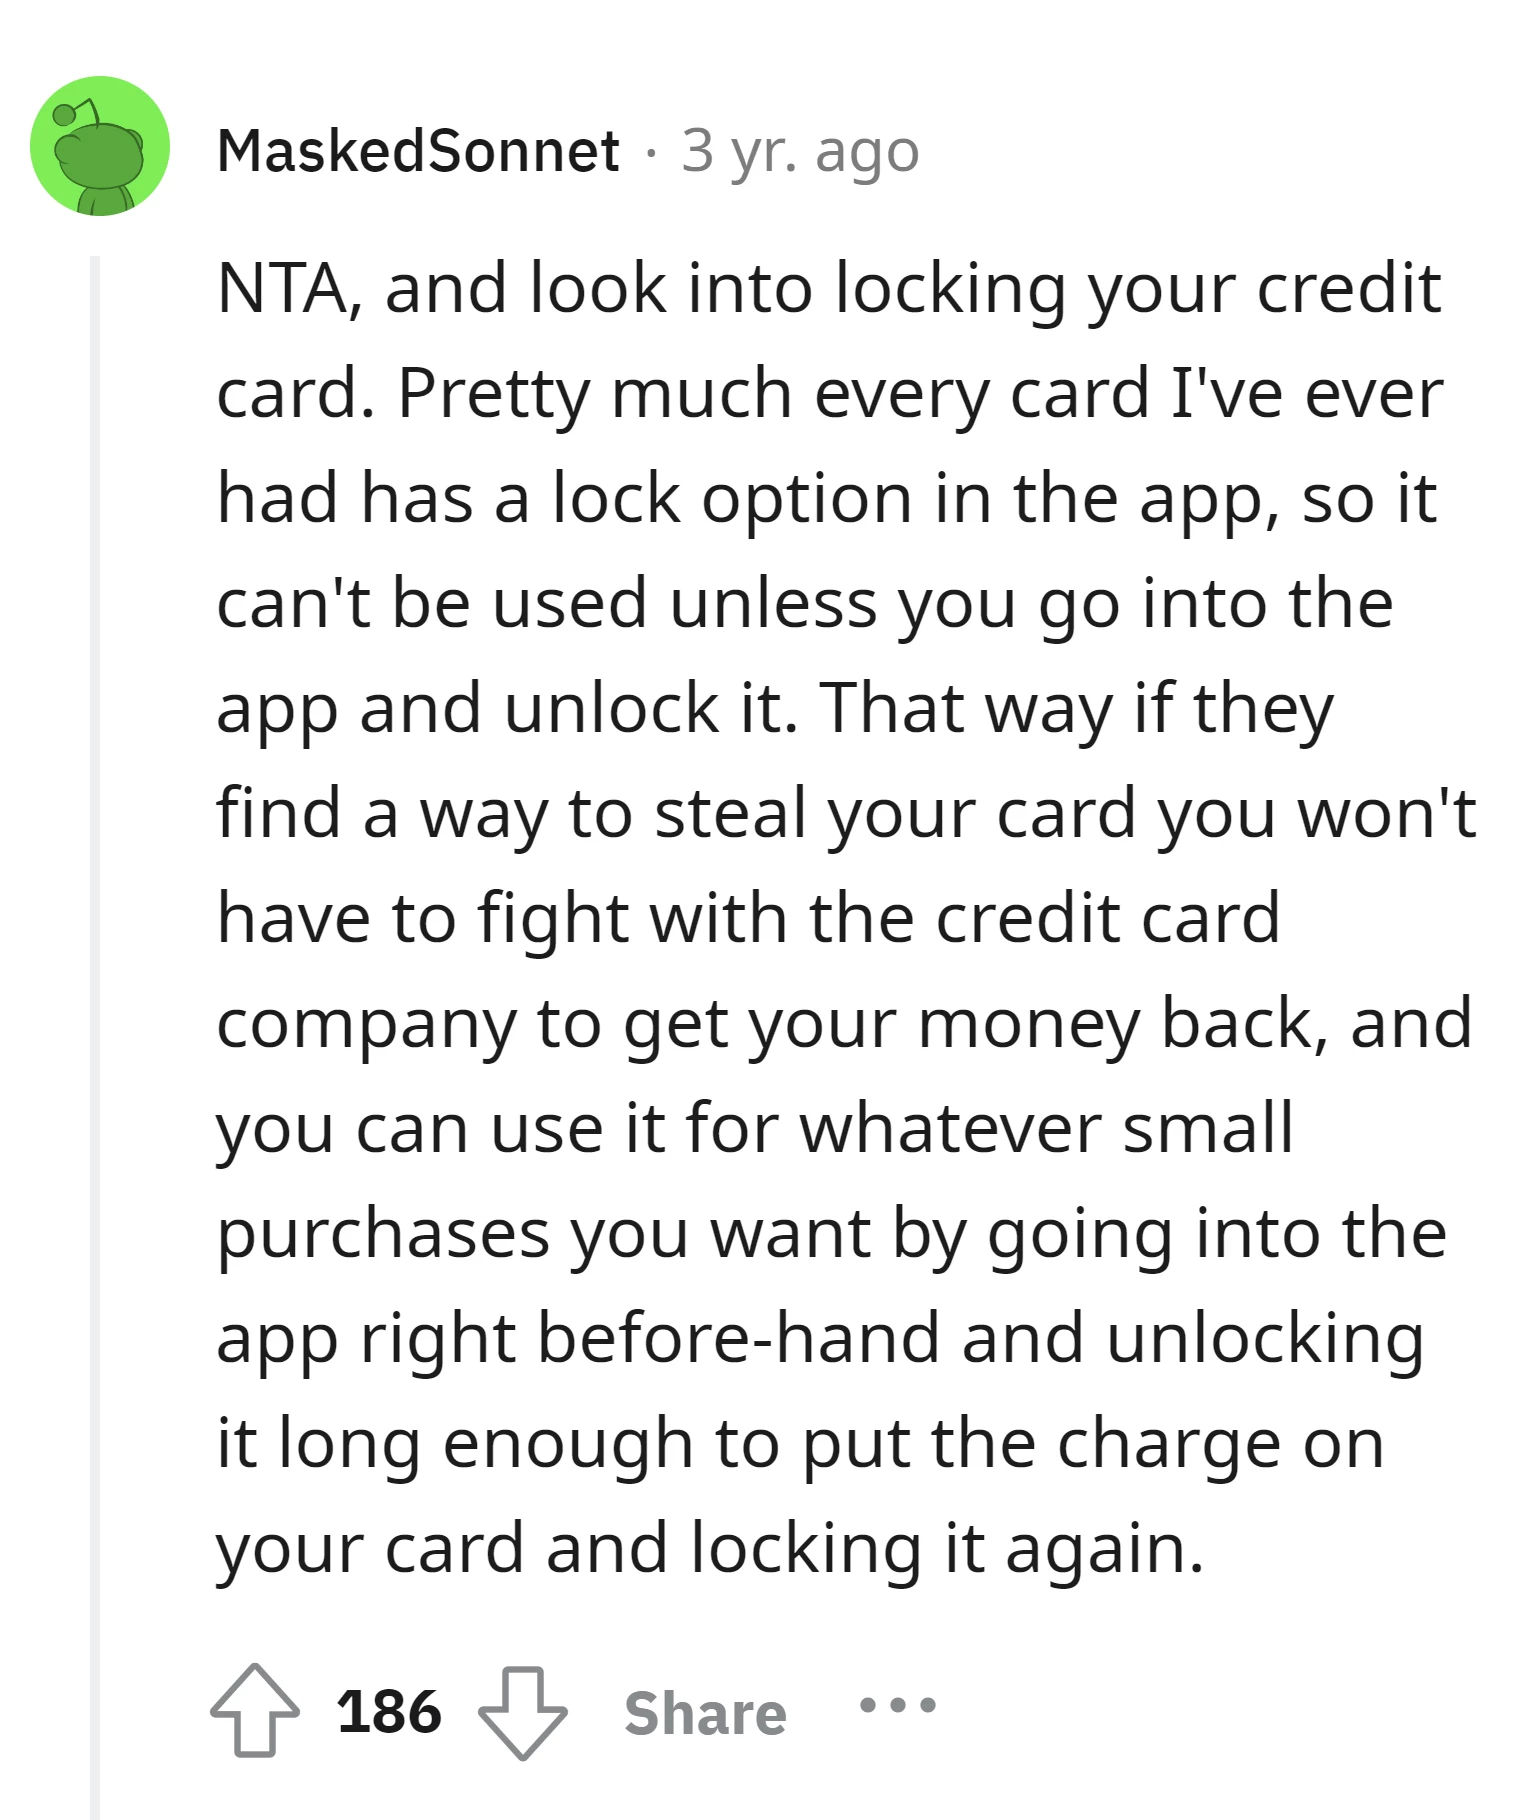 Consider locking your credit card through the app to prevent unauthorized use